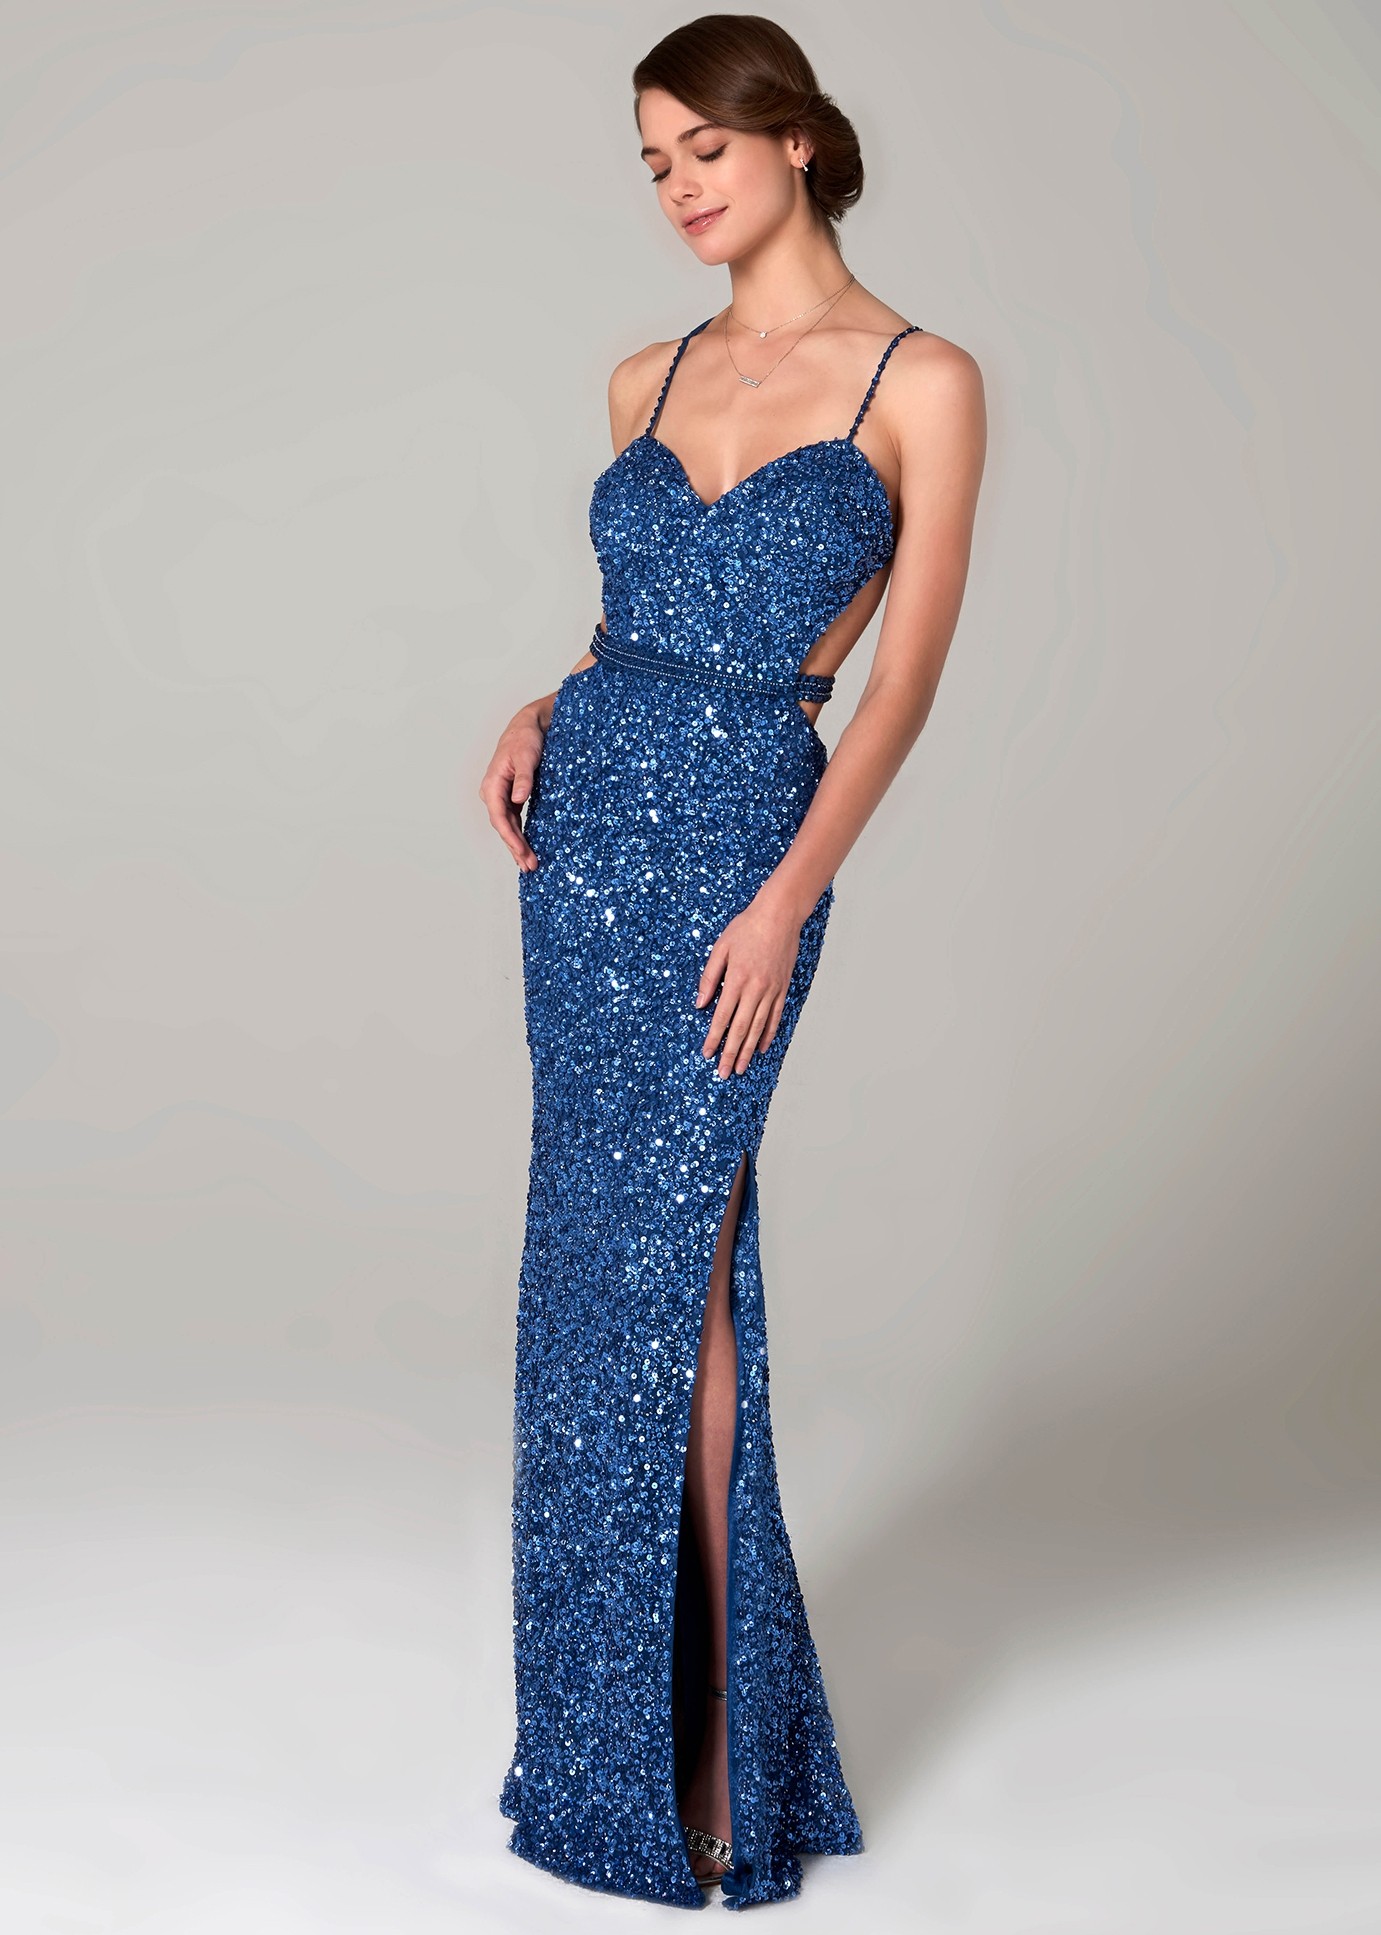 Scala 48931 Sequin Sweetheart Gown with Slit